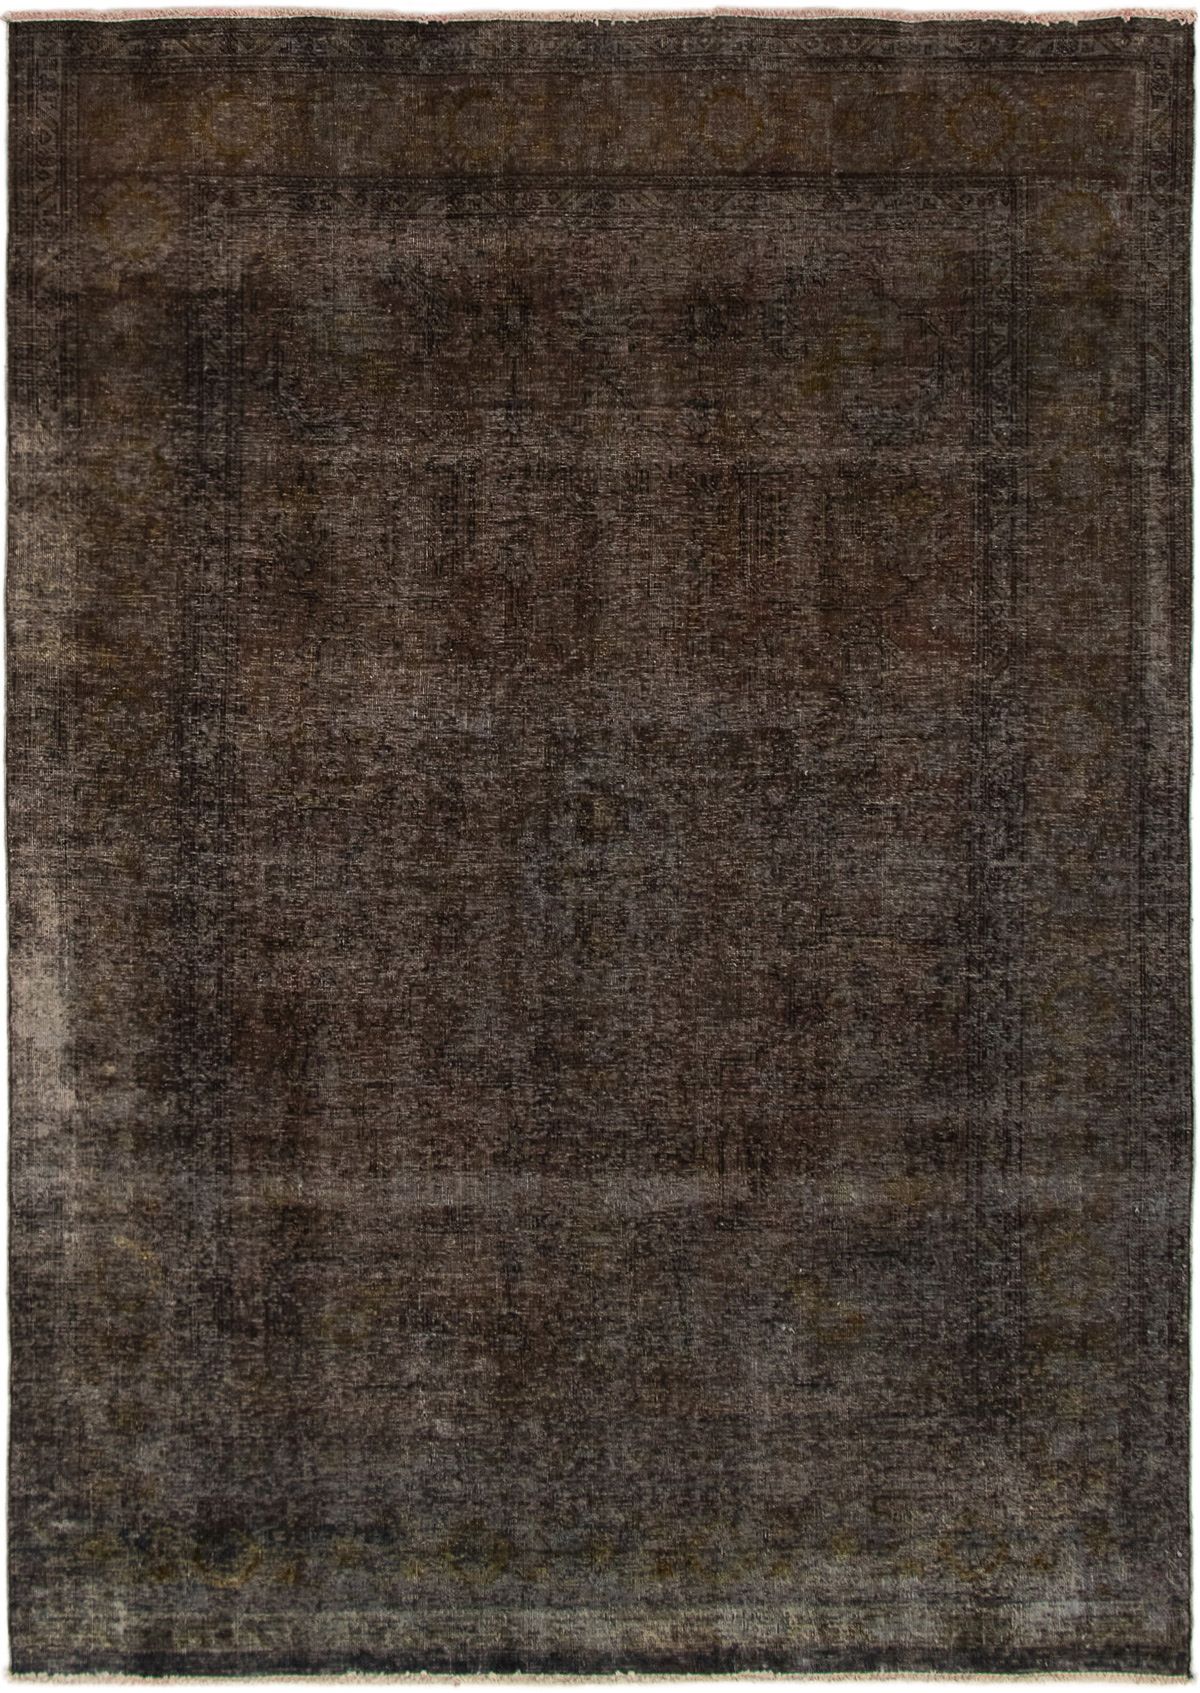 Hand-knotted Color Transition Dark Brown Wool Rug 6'7" x 9'3" Size: 6'7" x 9'3"  